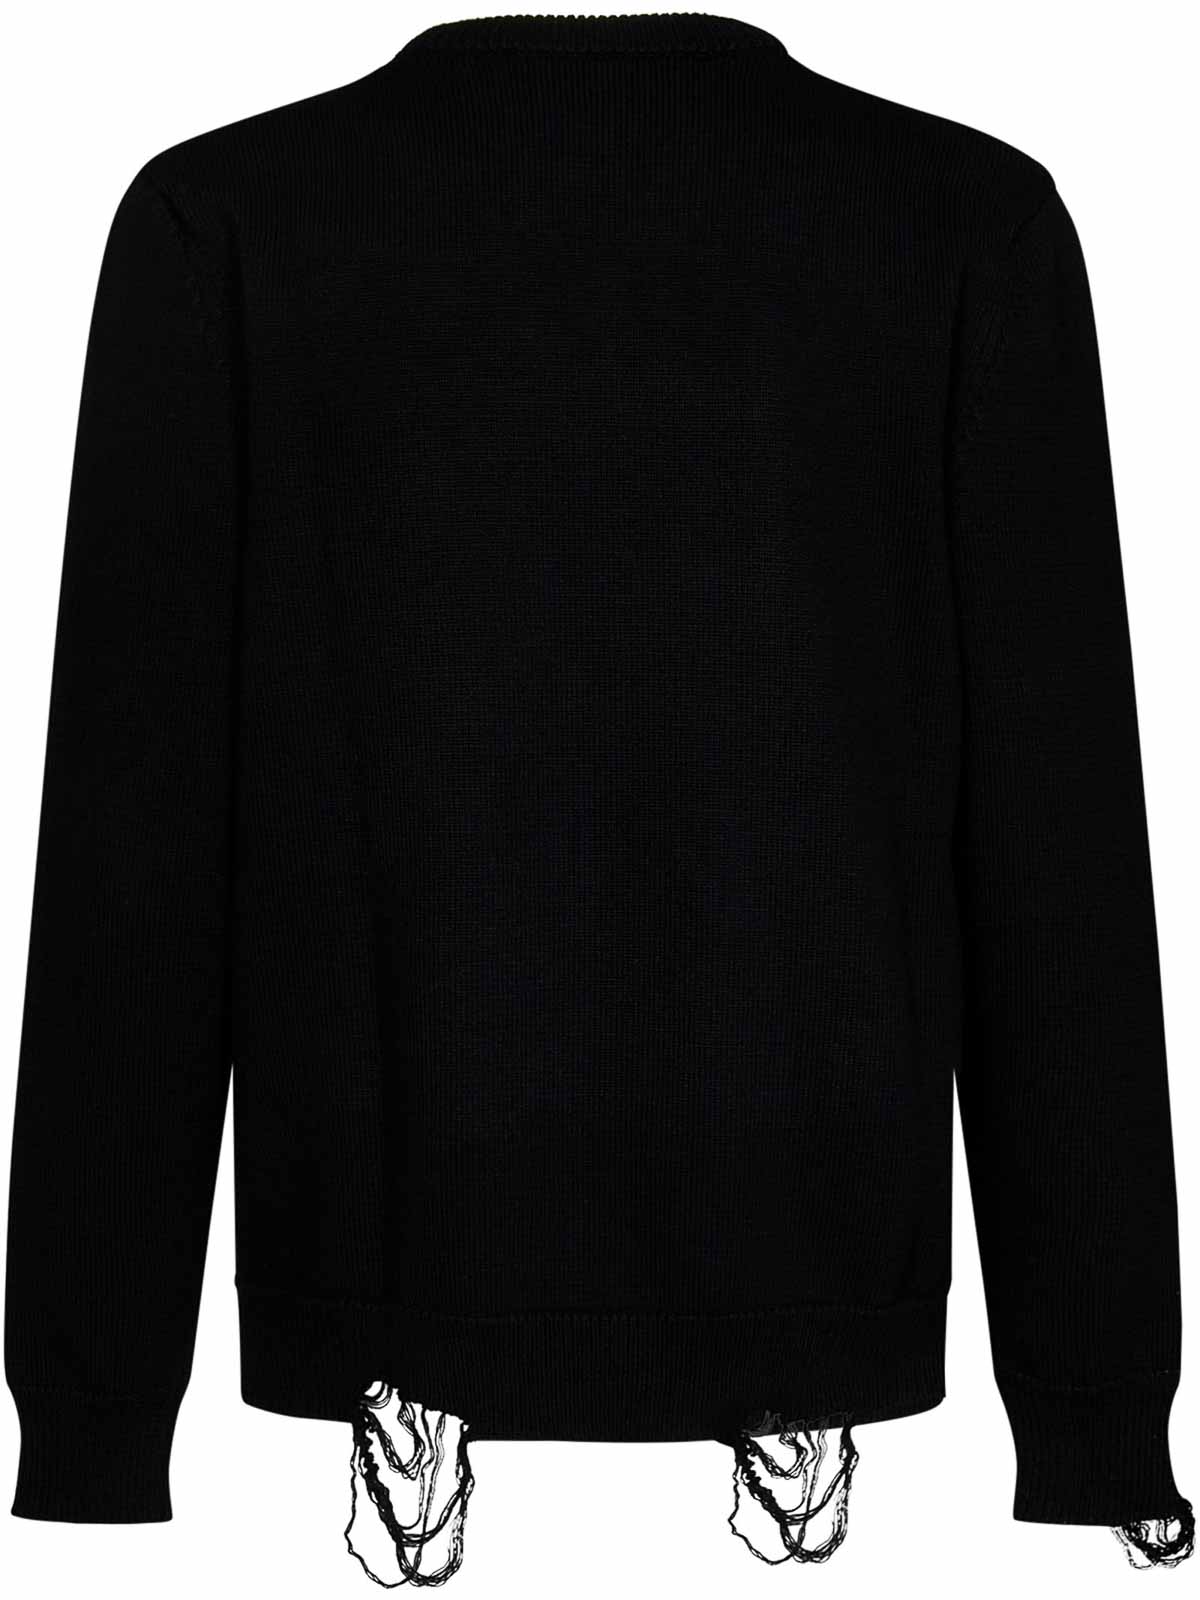 Givenchy White and Black Chain Jacquard Sweater Givenchy